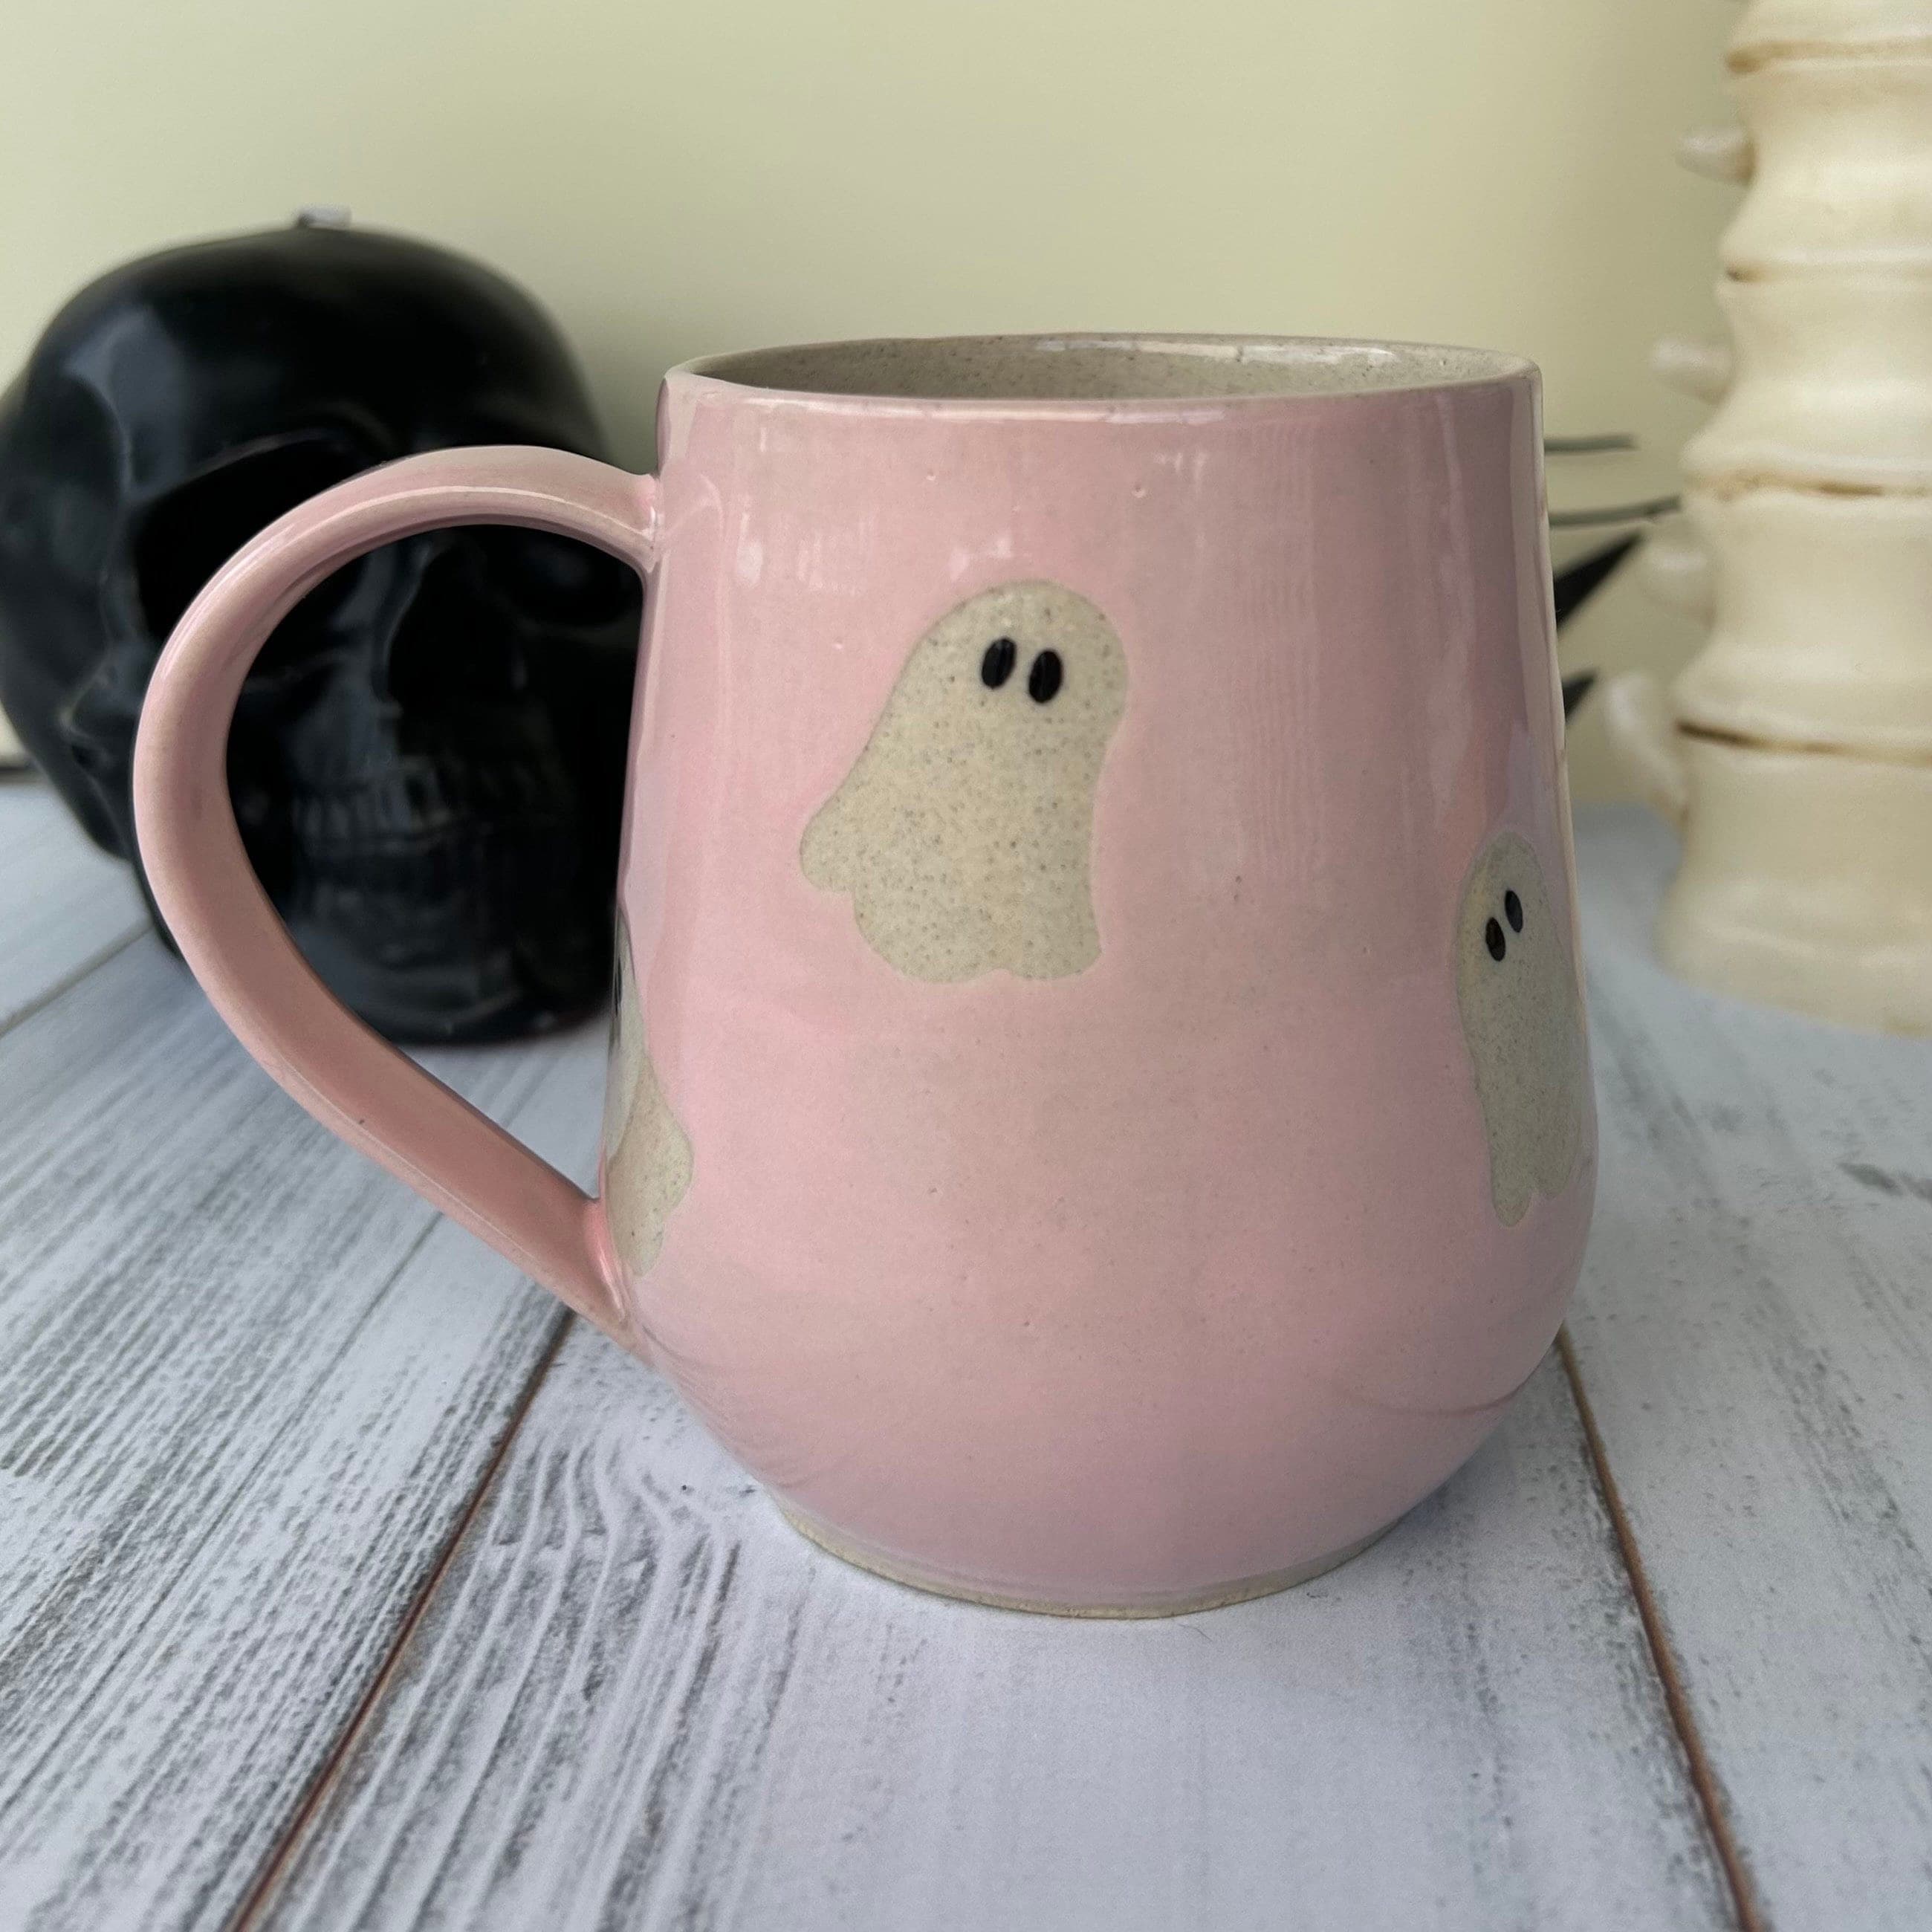 HomeGoods' New Pink Ceramic Ghosts Are So Cute